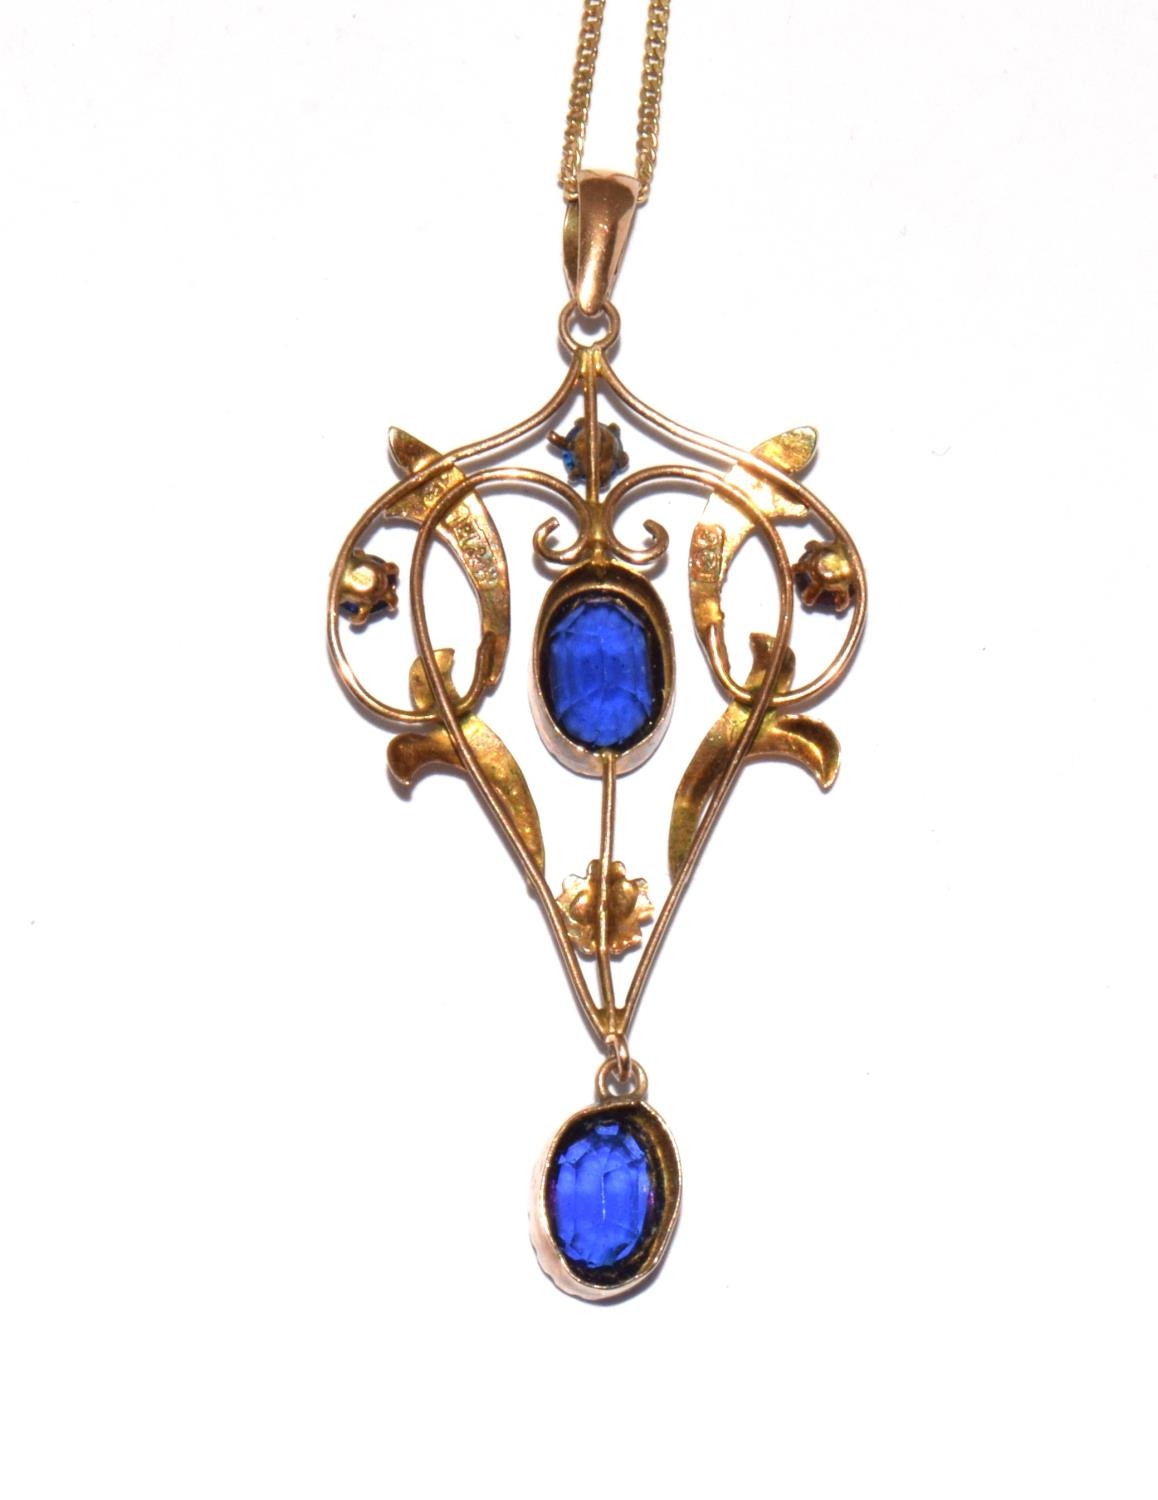 9ct gold Belle Epoque pendant set with blue stones and pearls on a gilded chain - Image 5 of 6